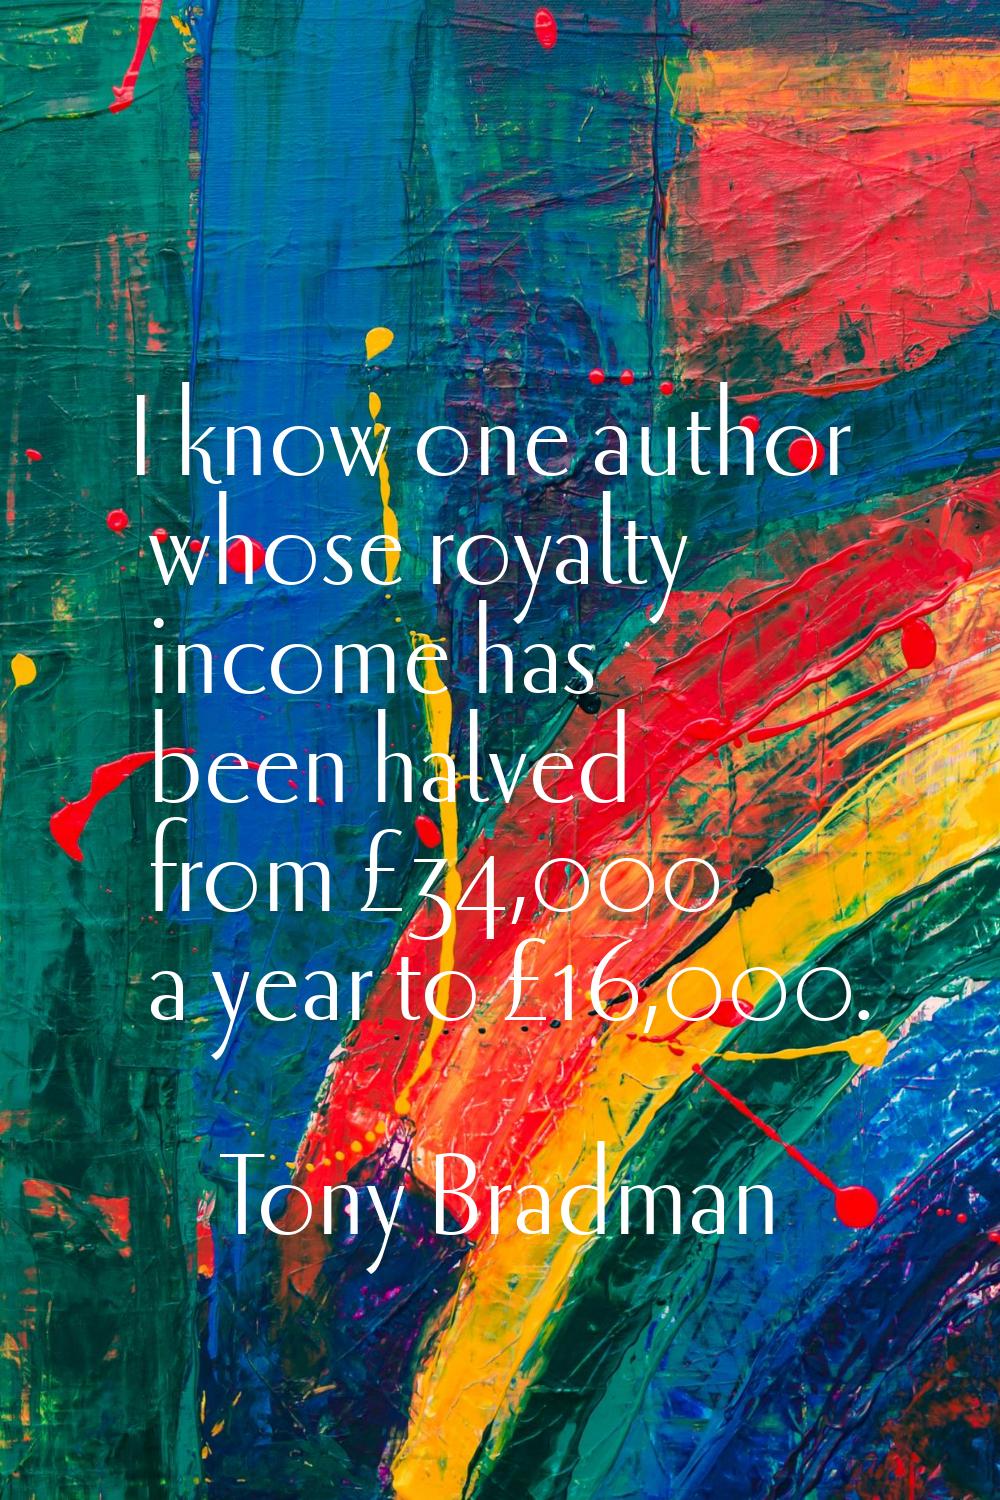 I know one author whose royalty income has been halved from £34,000 a year to £16,000.